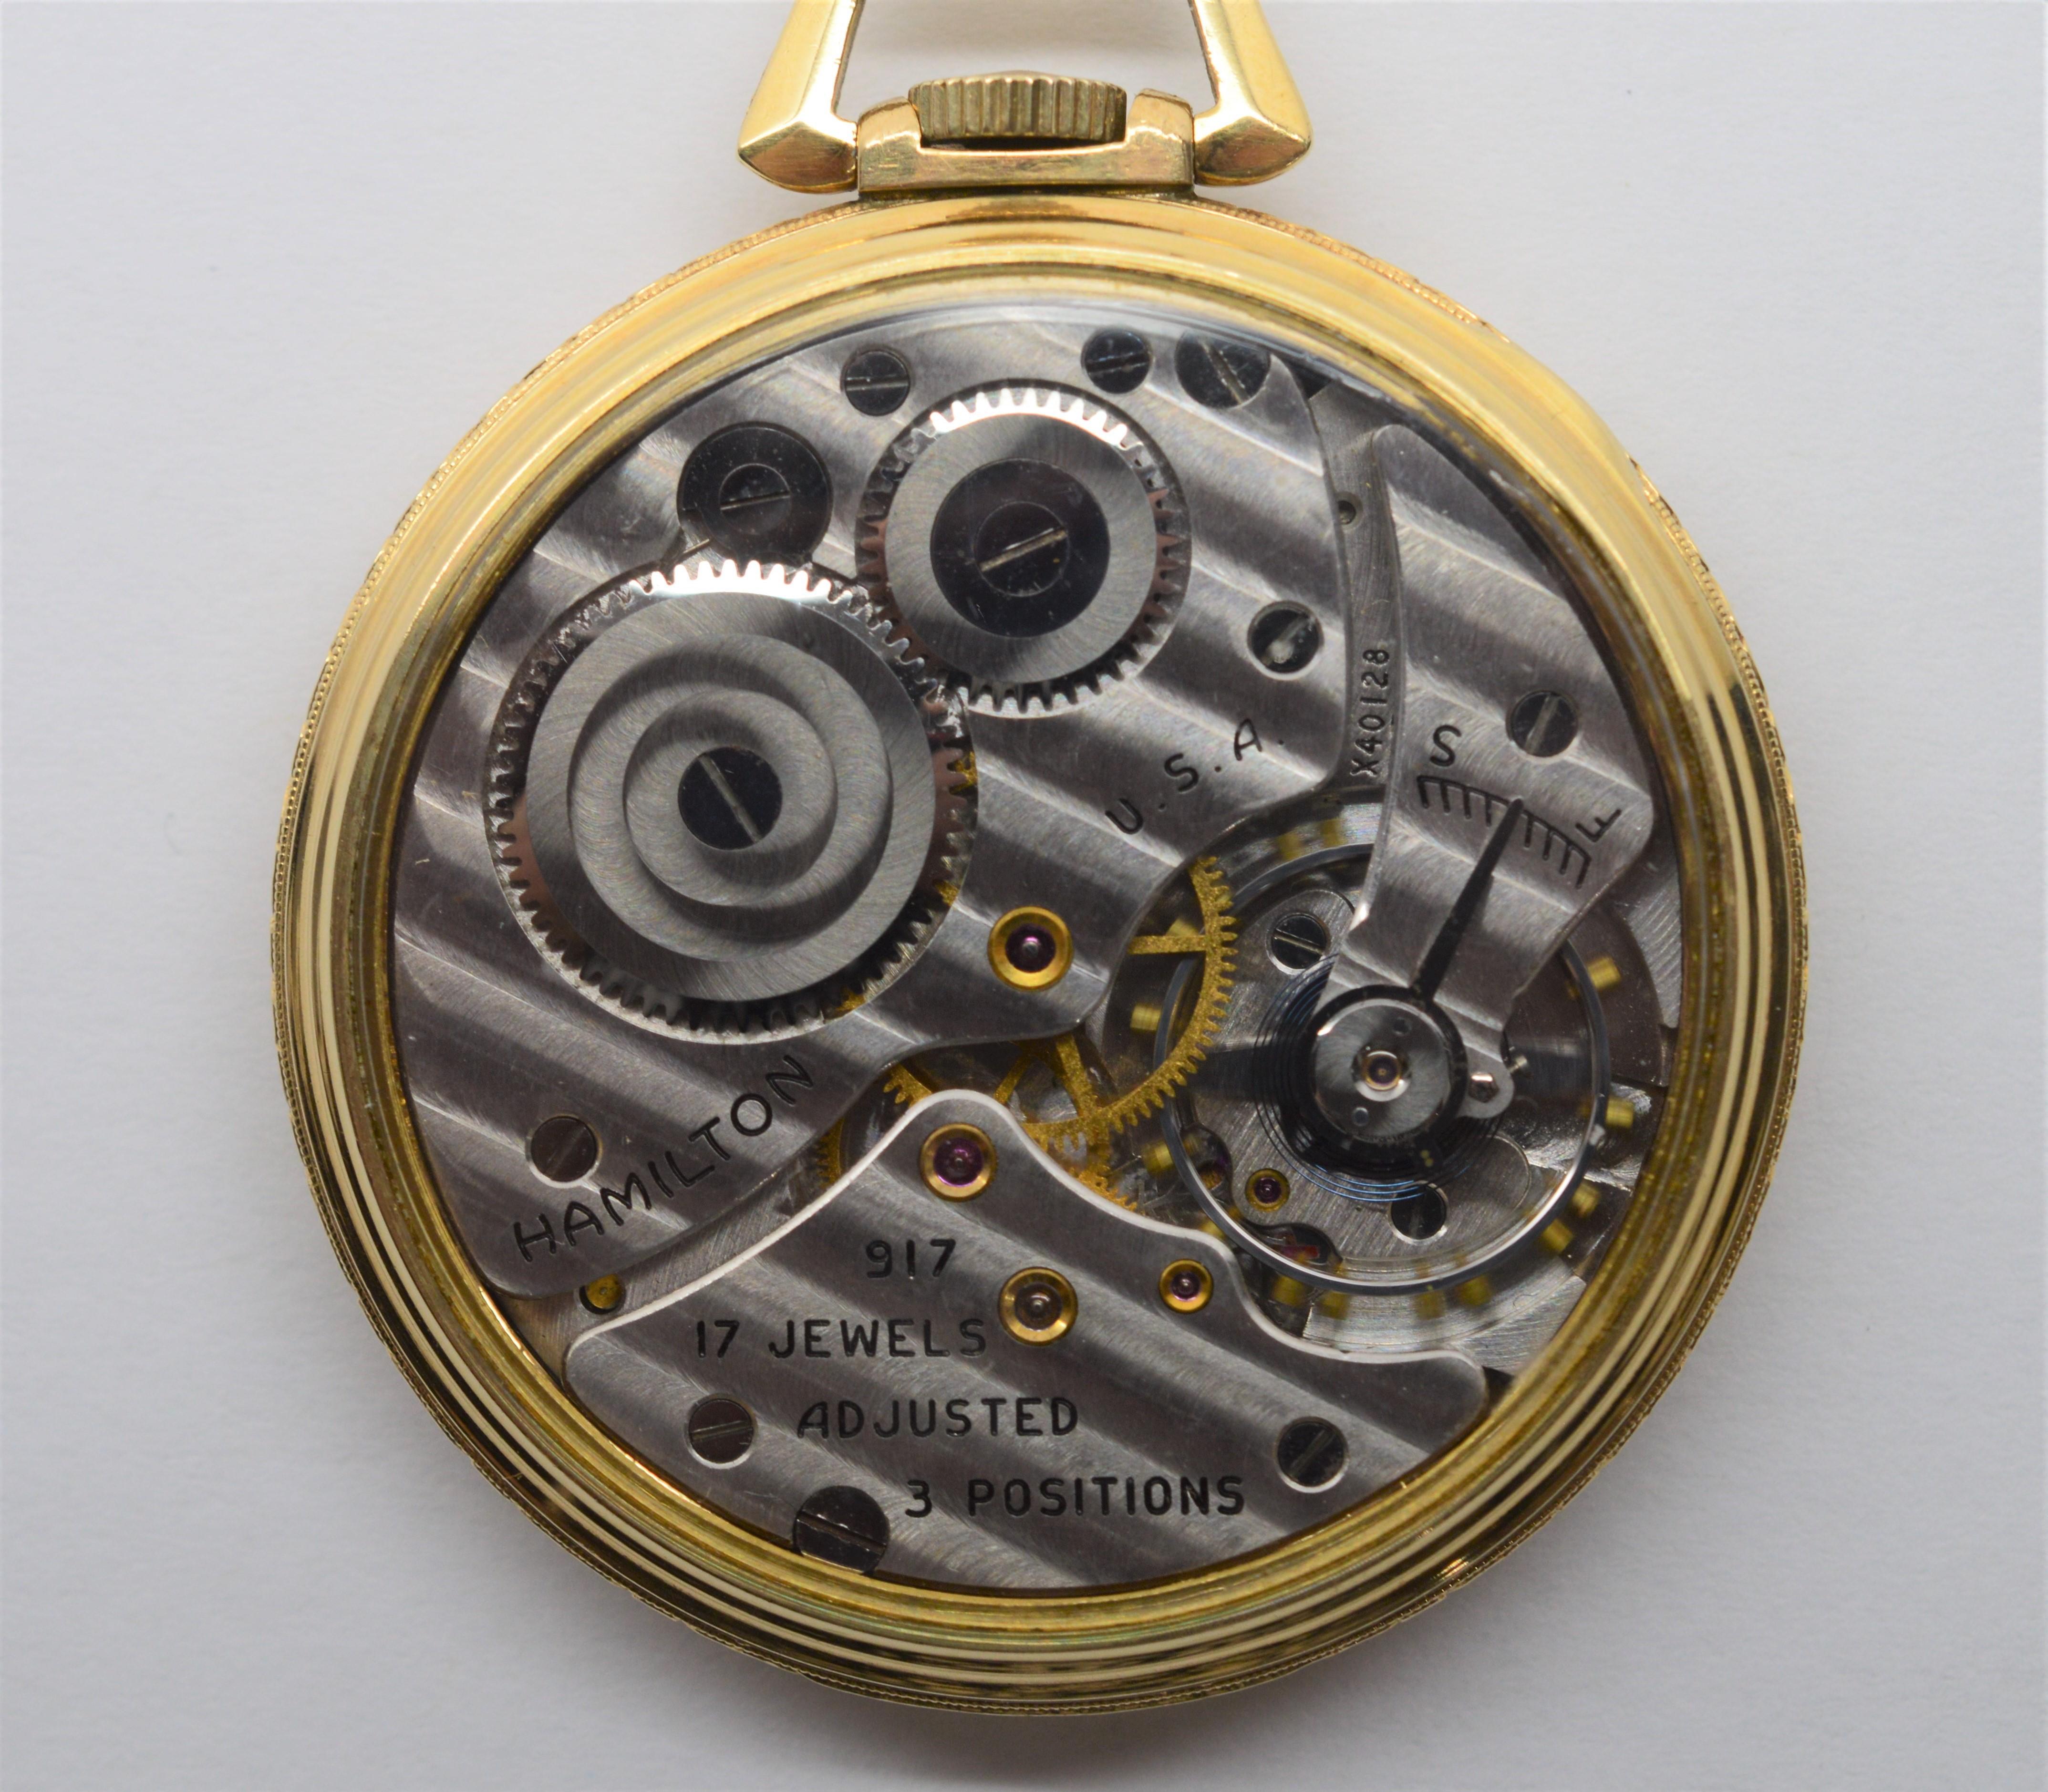 Enjoy seeing the craftsmanship in this Hamilton 917 Brass Pocket Watch, expertly restored with a unique display back allowing the intricate parts of this timepiece to be viewed. Measures 43.8 millimeters. Number X40128, circa 1937 with seventeen